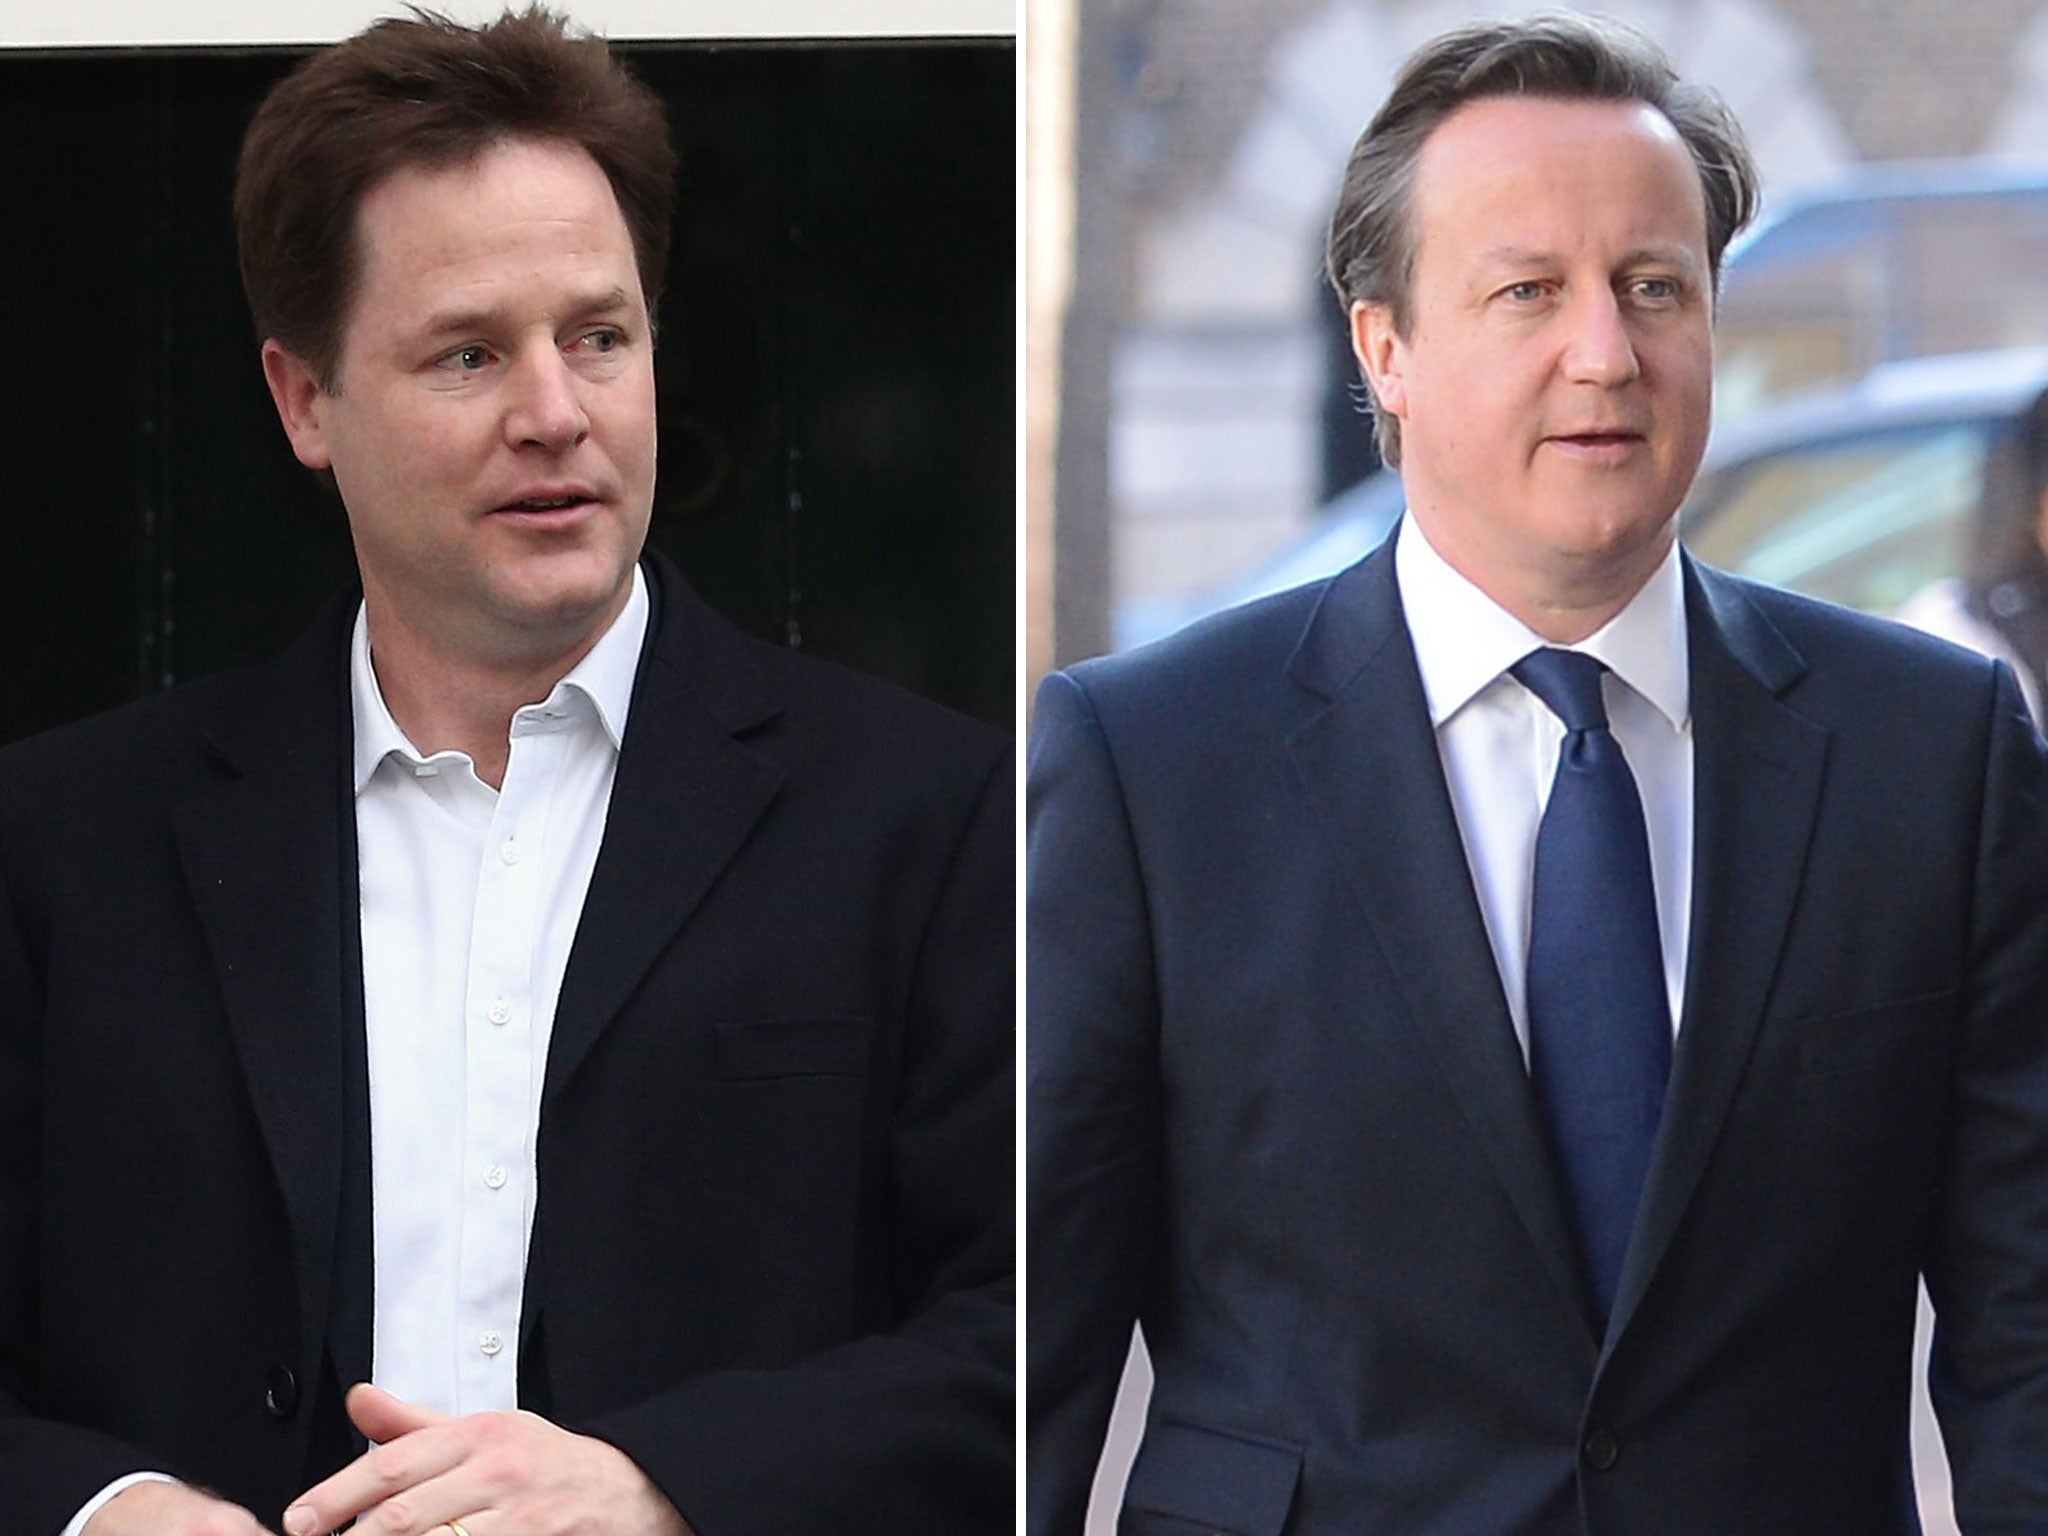 Nick Clegg and David Cameron talked intensely in St Paul's before Margaret Thatcher's funeral